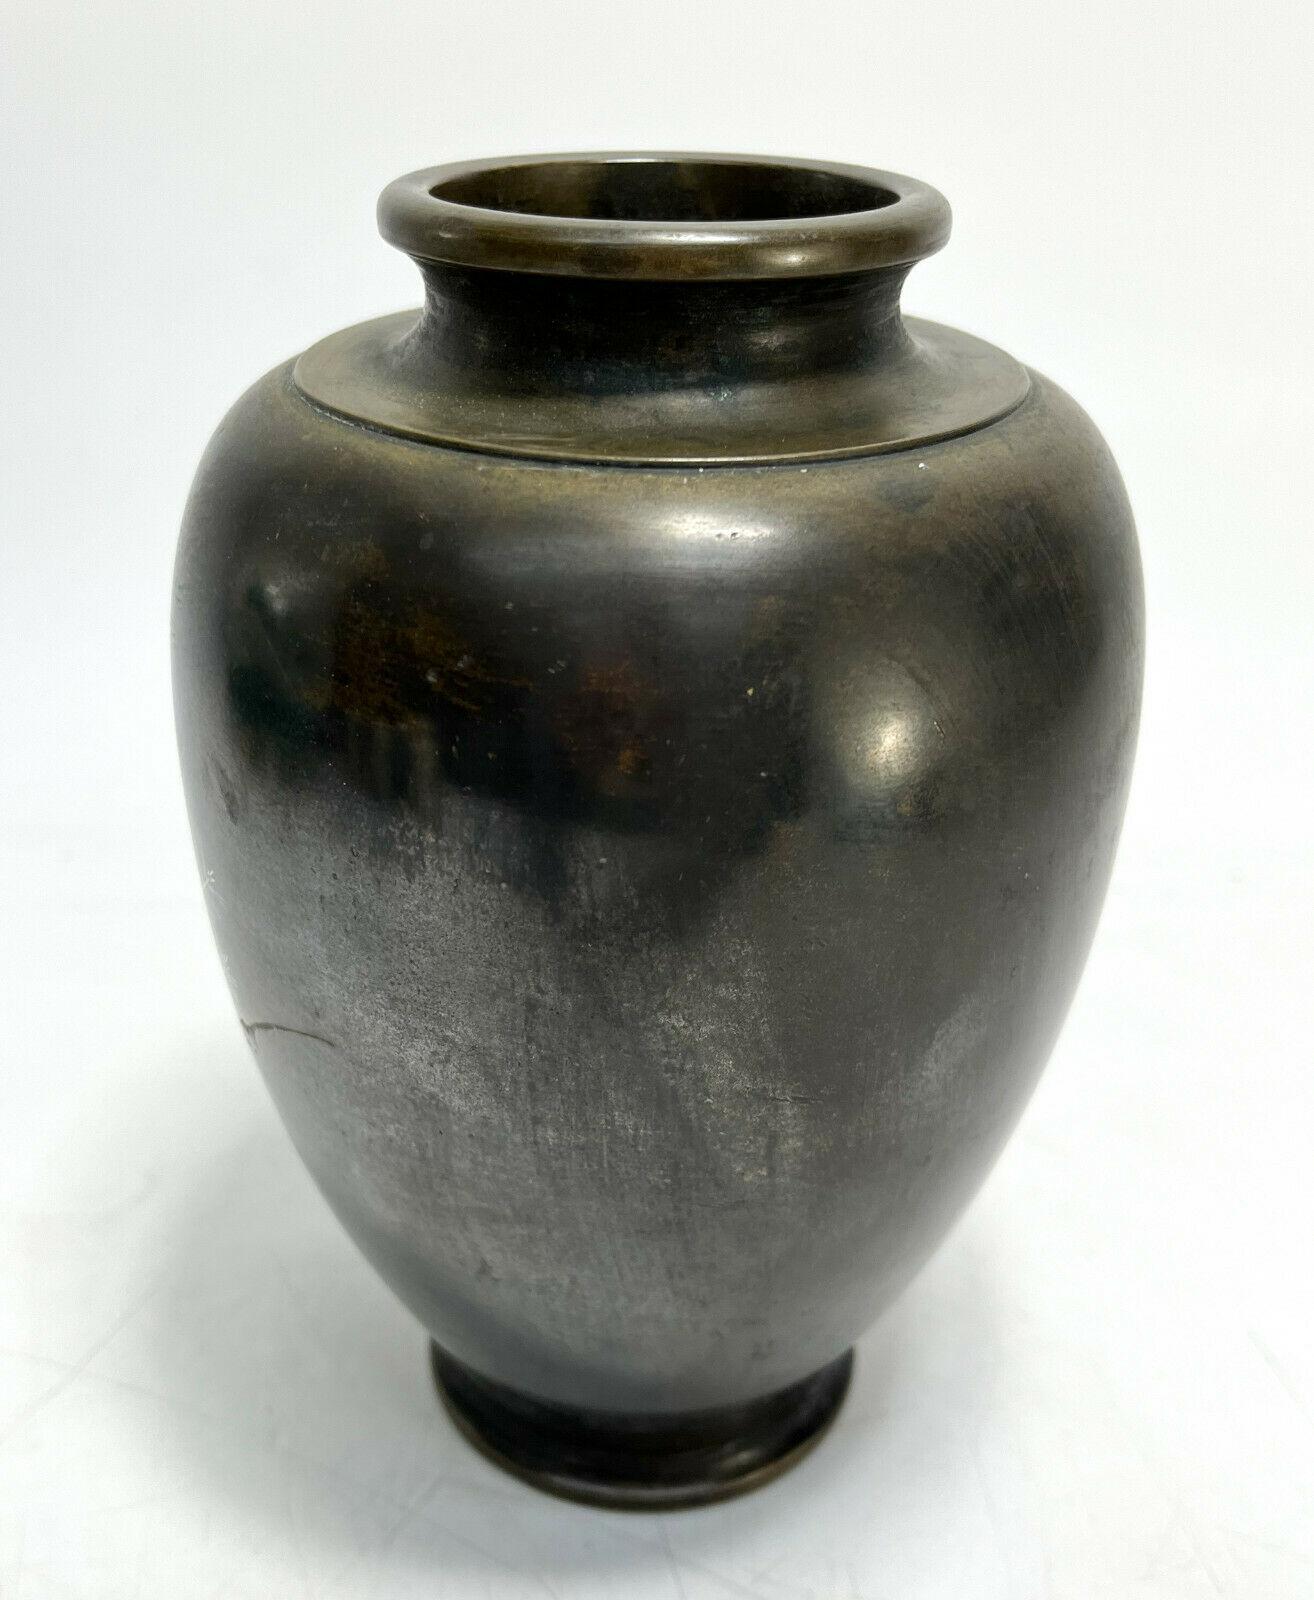 Japanese Mixed Metal Bronze and Silver Vase, Storks, Likely Meiji Period In Good Condition For Sale In Gardena, CA